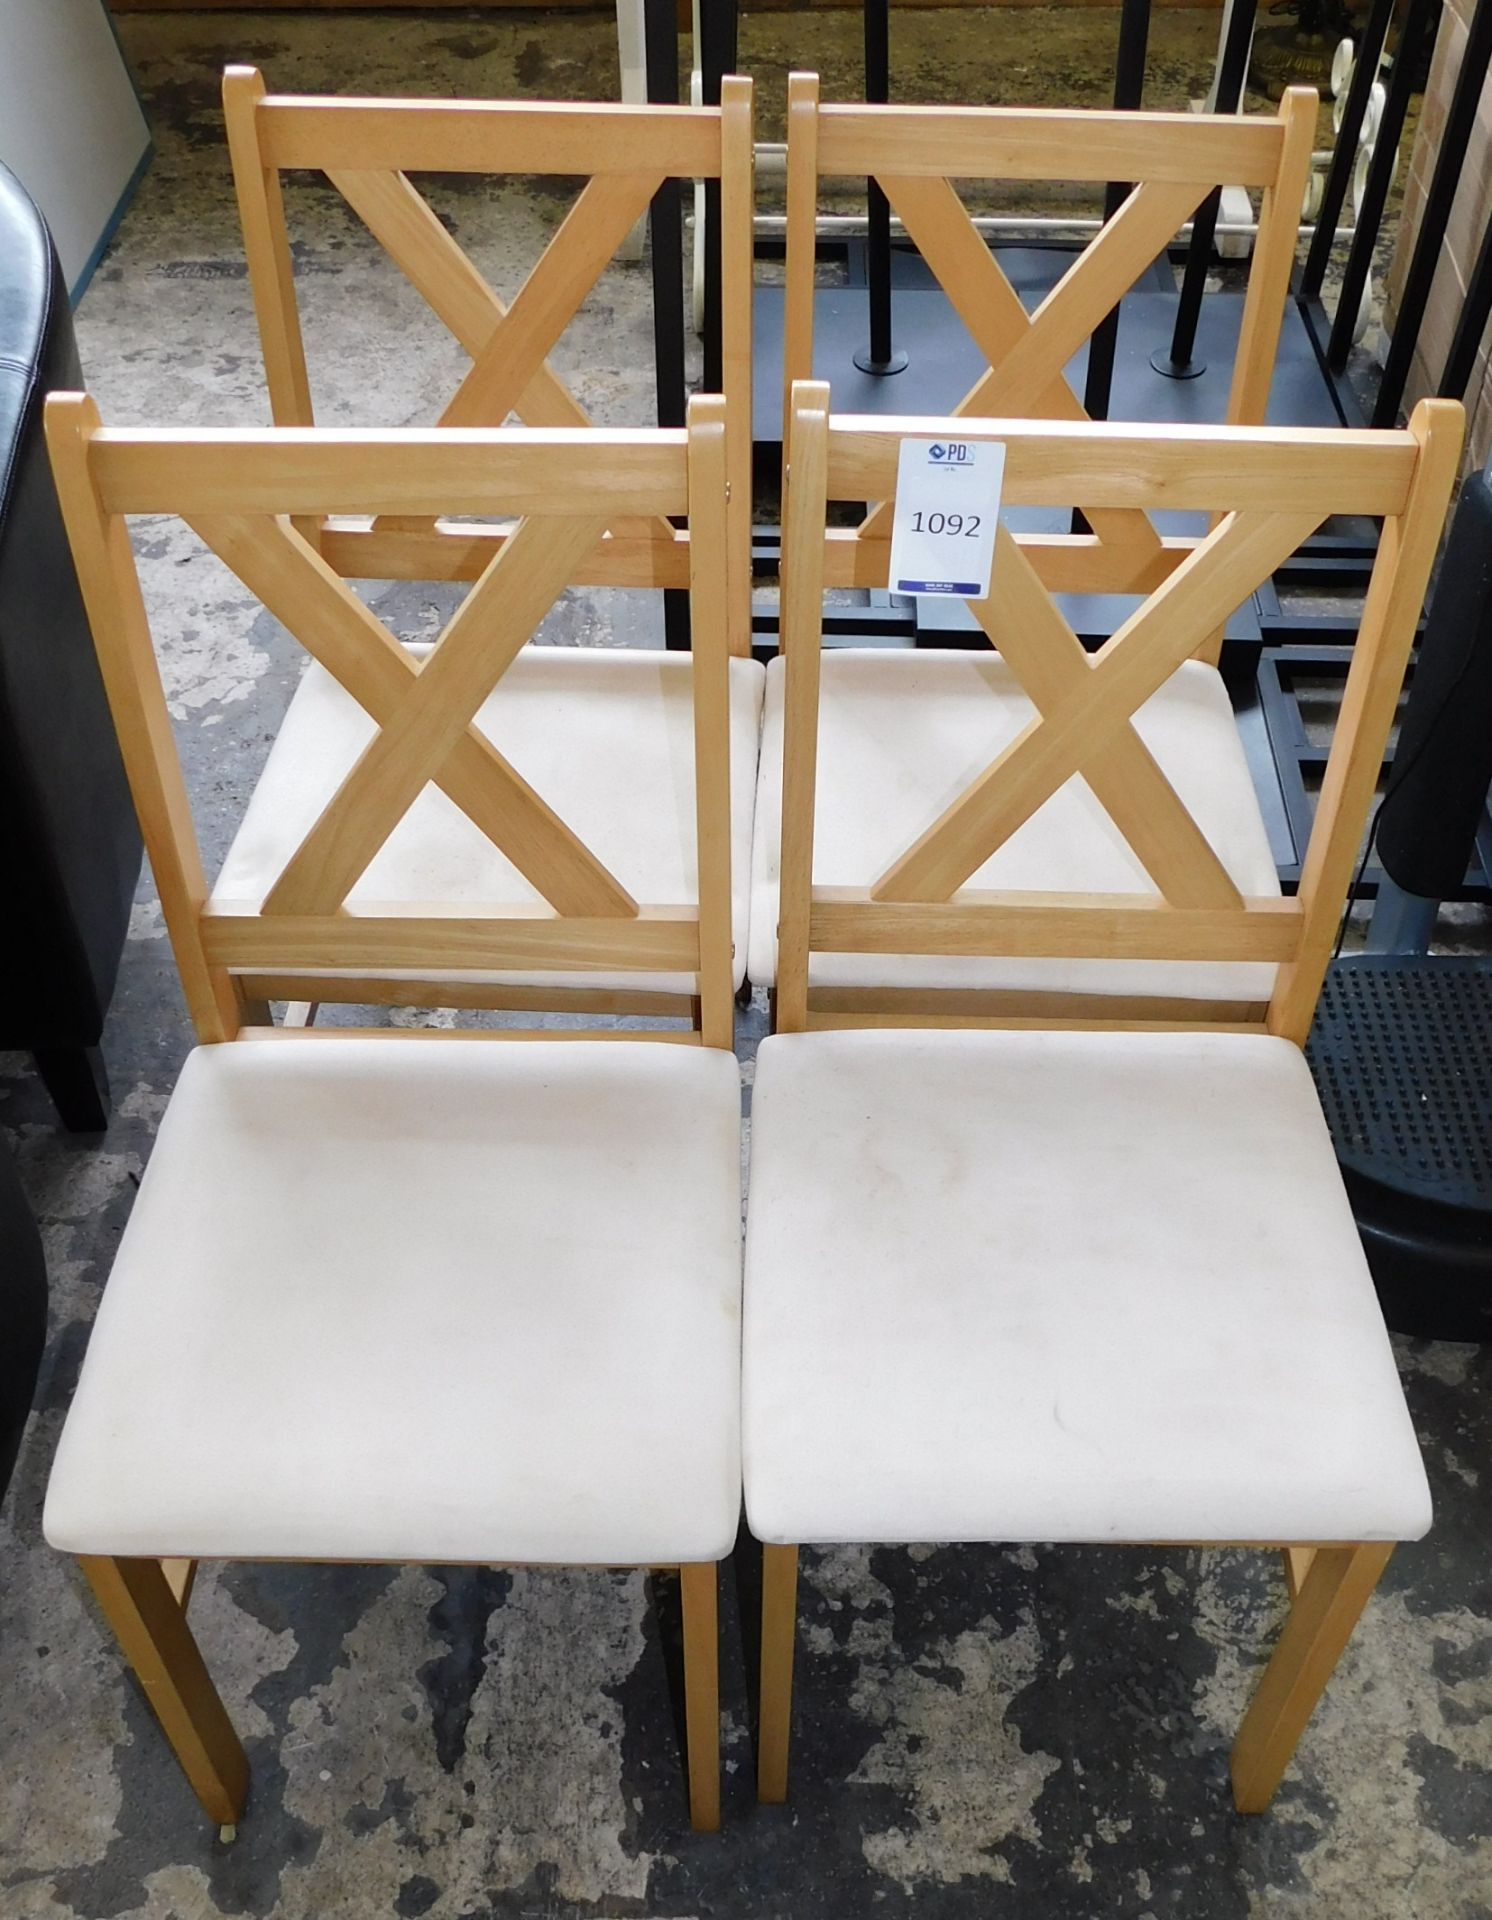 4 Wooden Framed Chairs (Located Stockport – See General Notes for More Details)